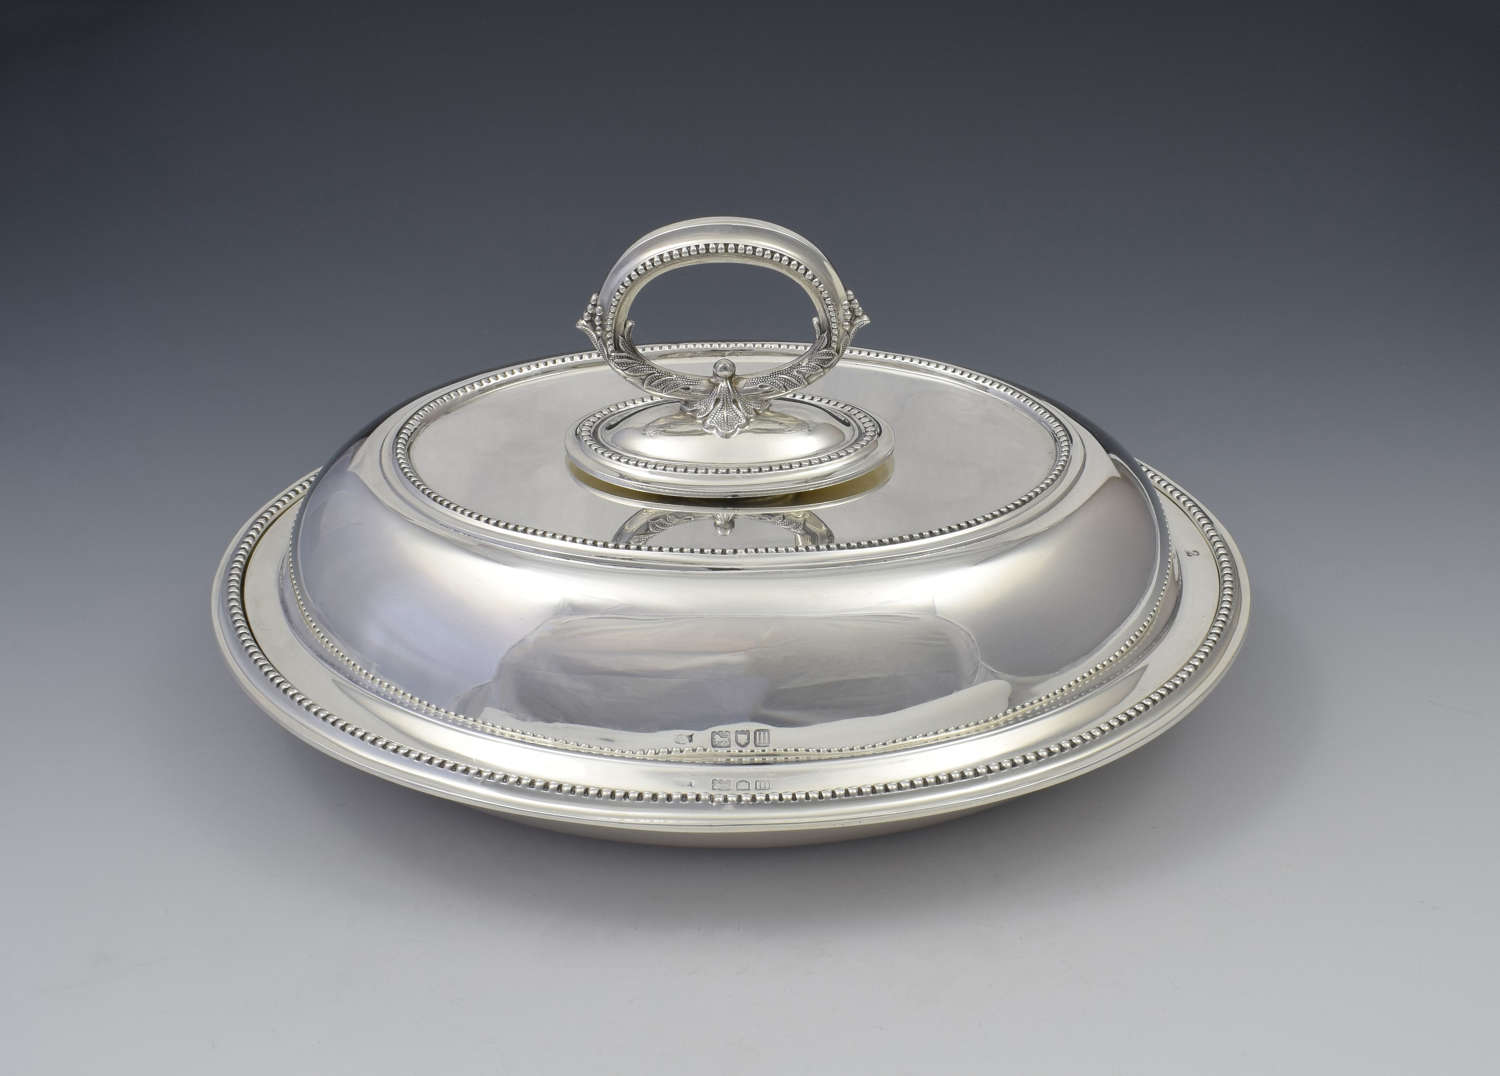 Edwardian Sterling Silver Oval Entree Dish, Hawksworth, Eyre & Co.